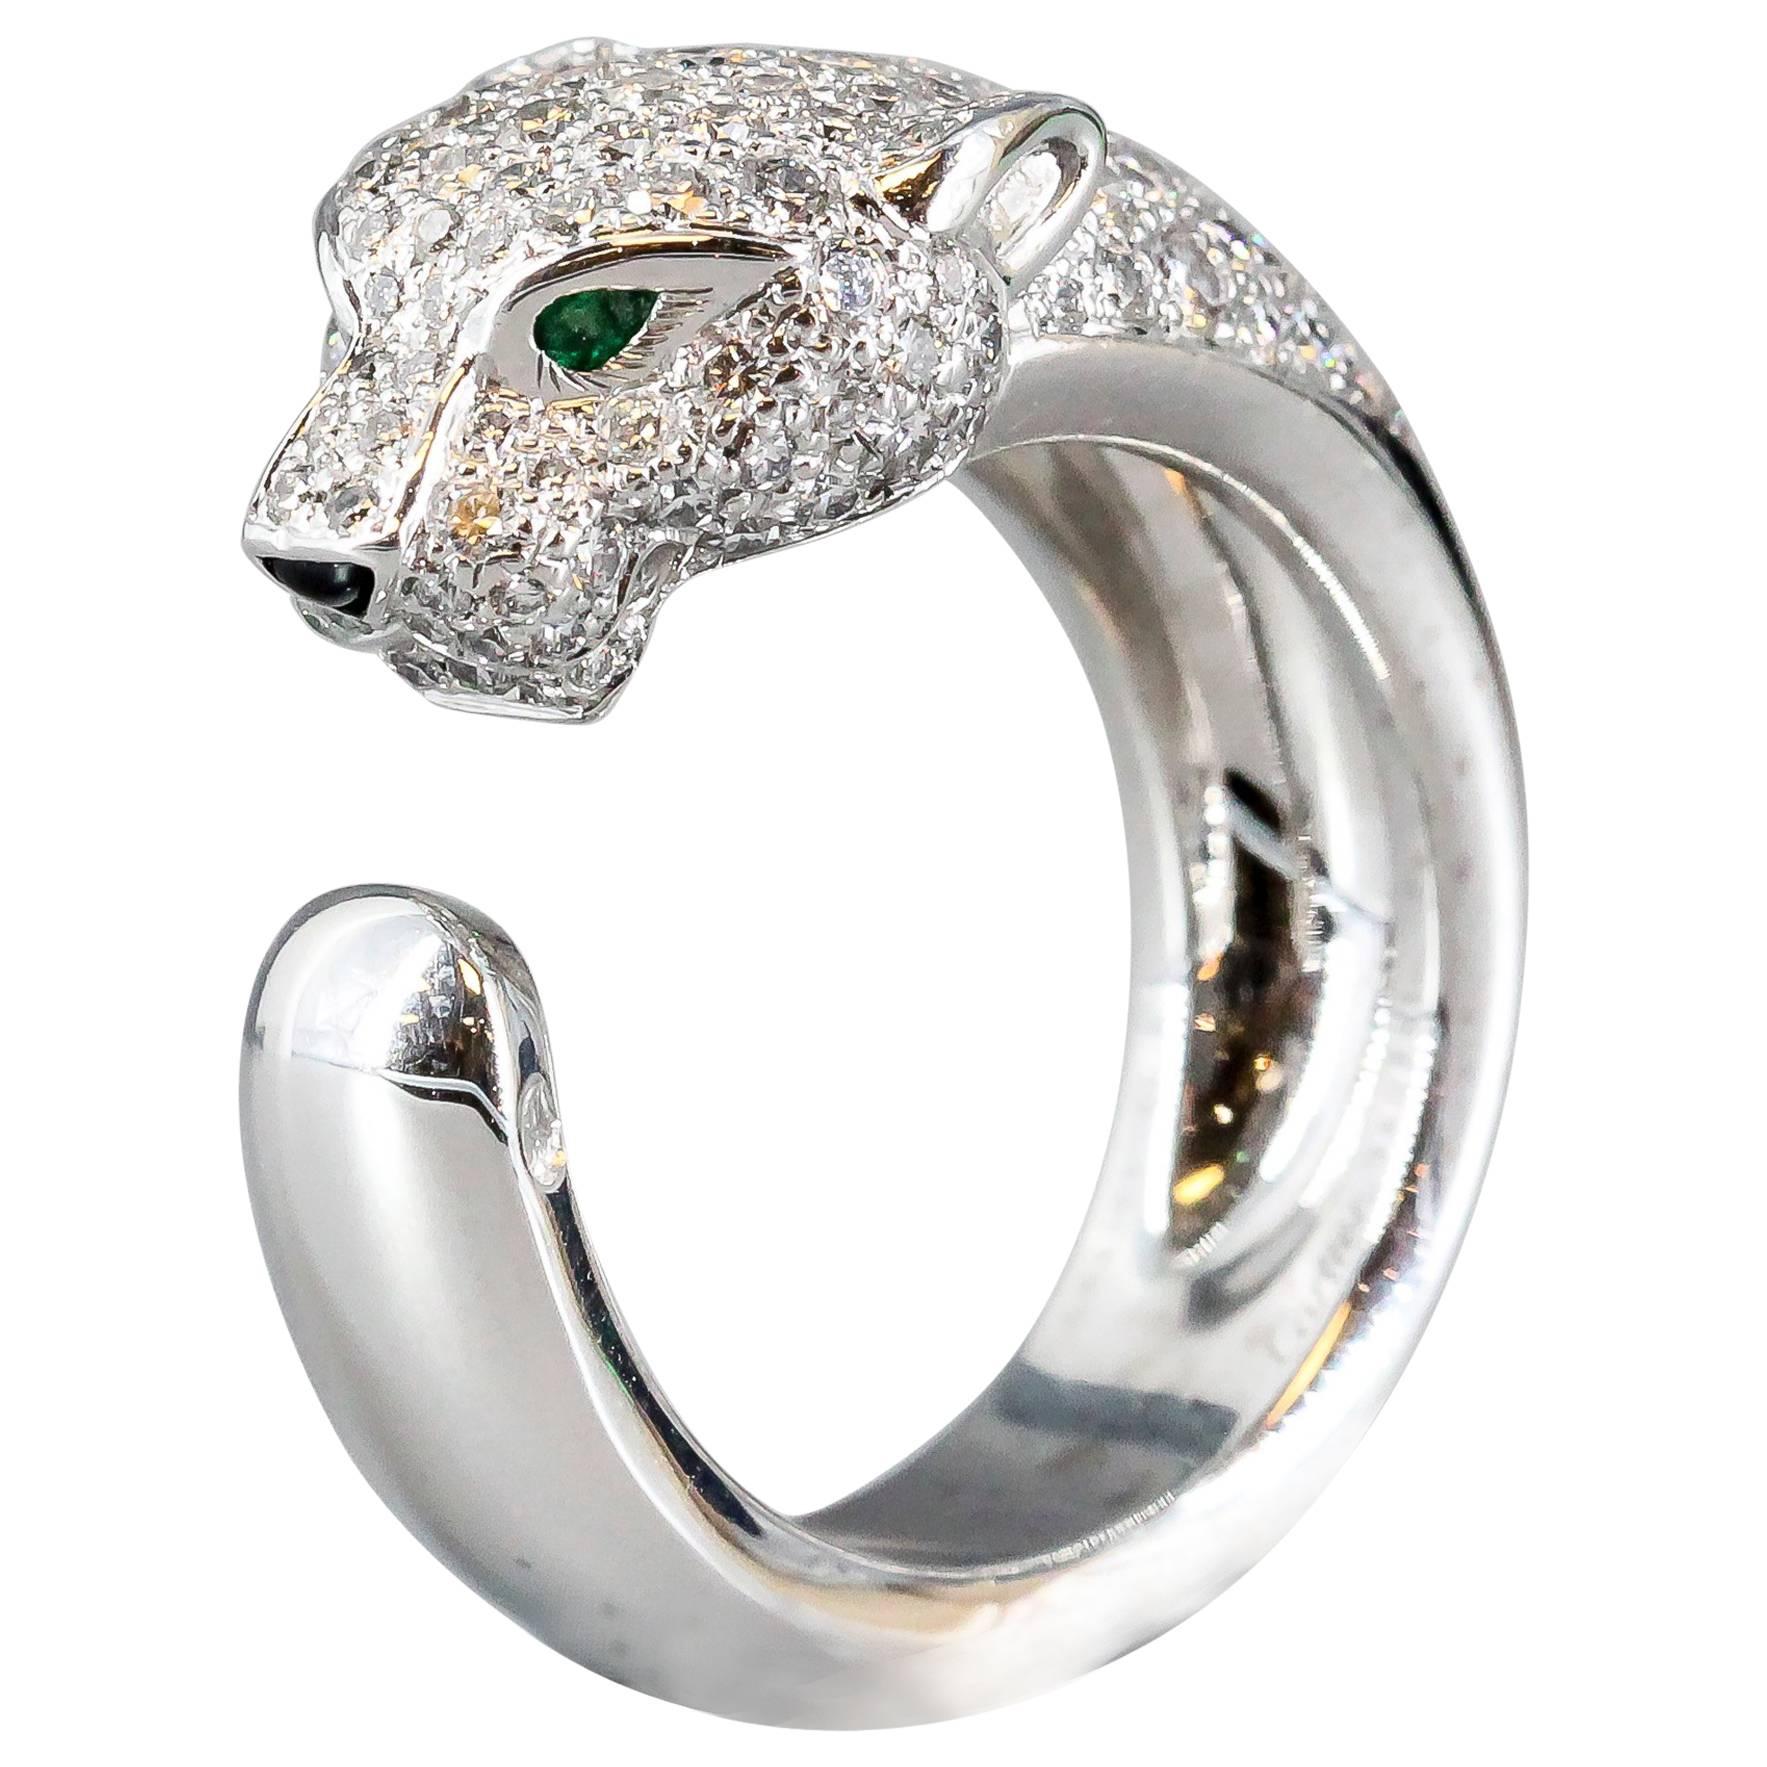 Cartier Panthere Diamond Emerald Onyx White Gold Band Ring